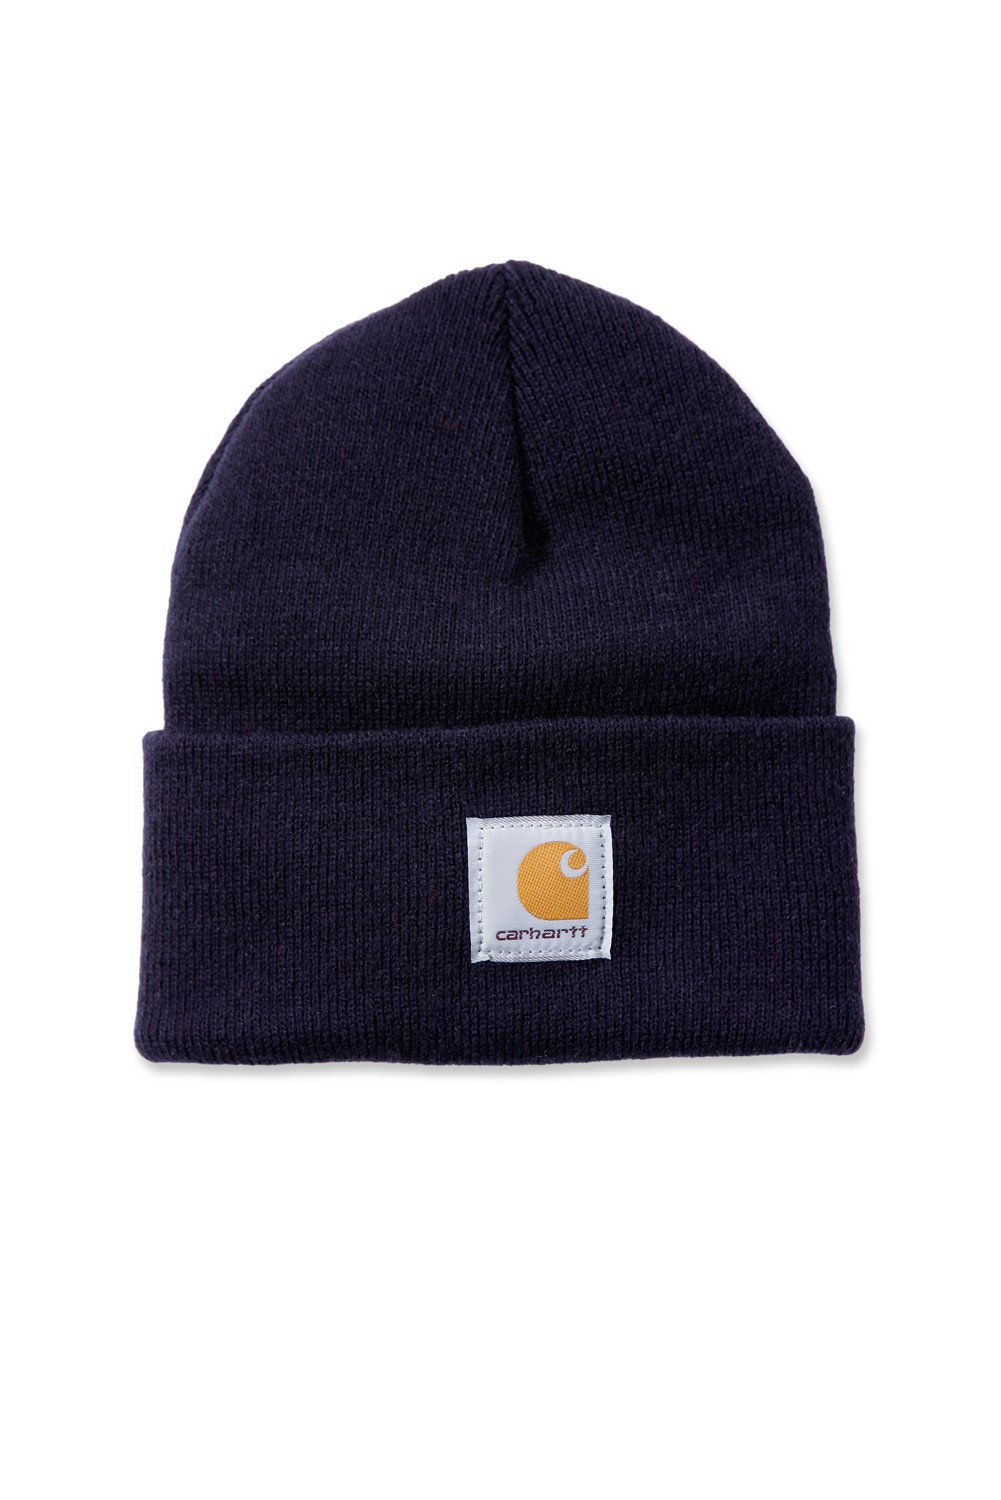 Carhartt Classic Watch Hat-Navy-One Size